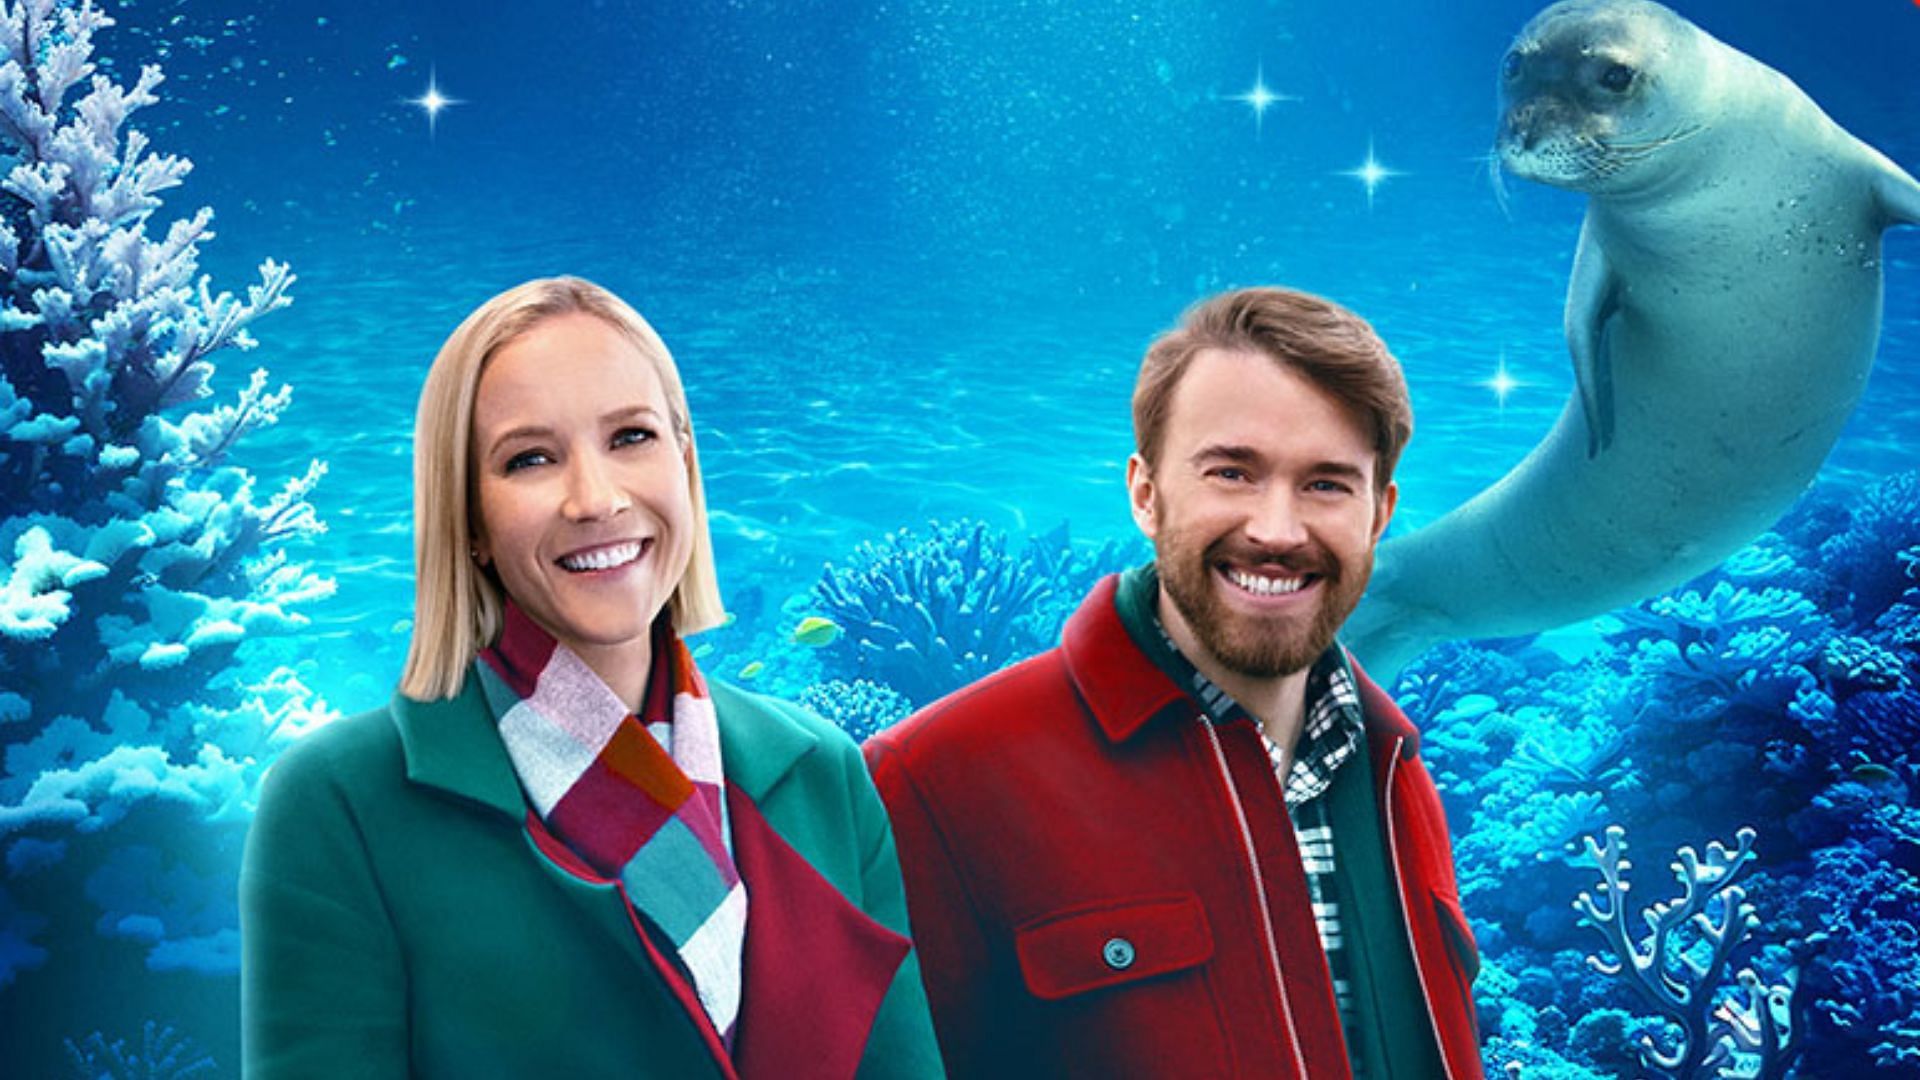 Mystic Christmas cast list Chandler Massey, Patti Murin, and others